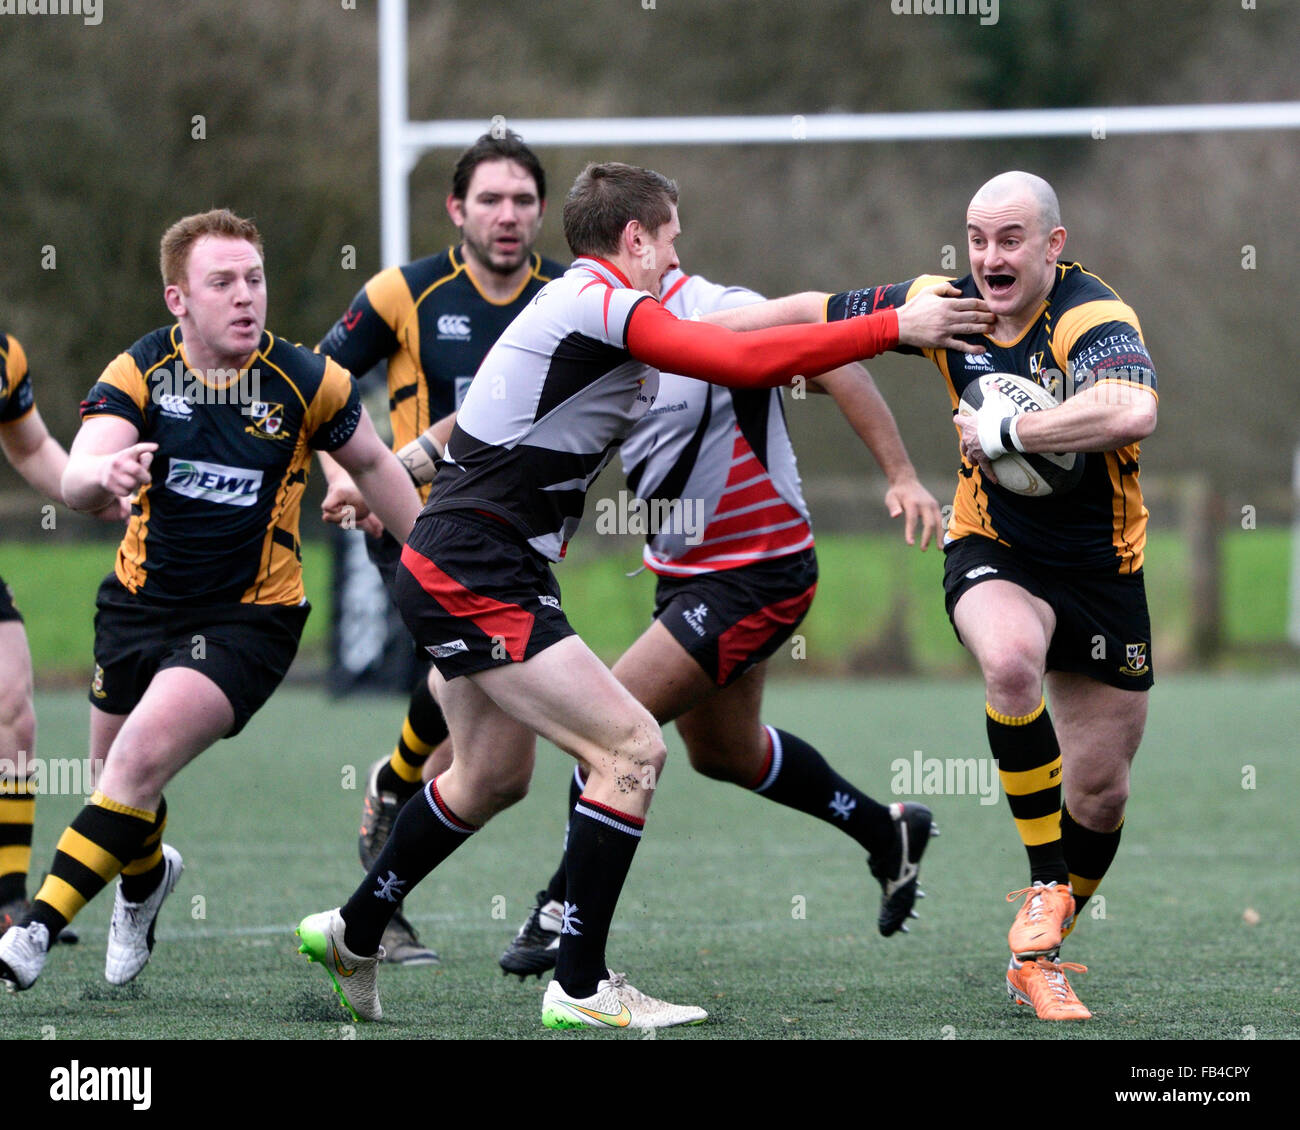 Burnage  9th January 2016 A Burnage player tries to break through in a match in which Burnage Rugby Club were attempting to move from bottom place in the league but were heavily defeated by Ilkley, who were third bottom. Credit:  John Fryer/Alamy Live News Stock Photo